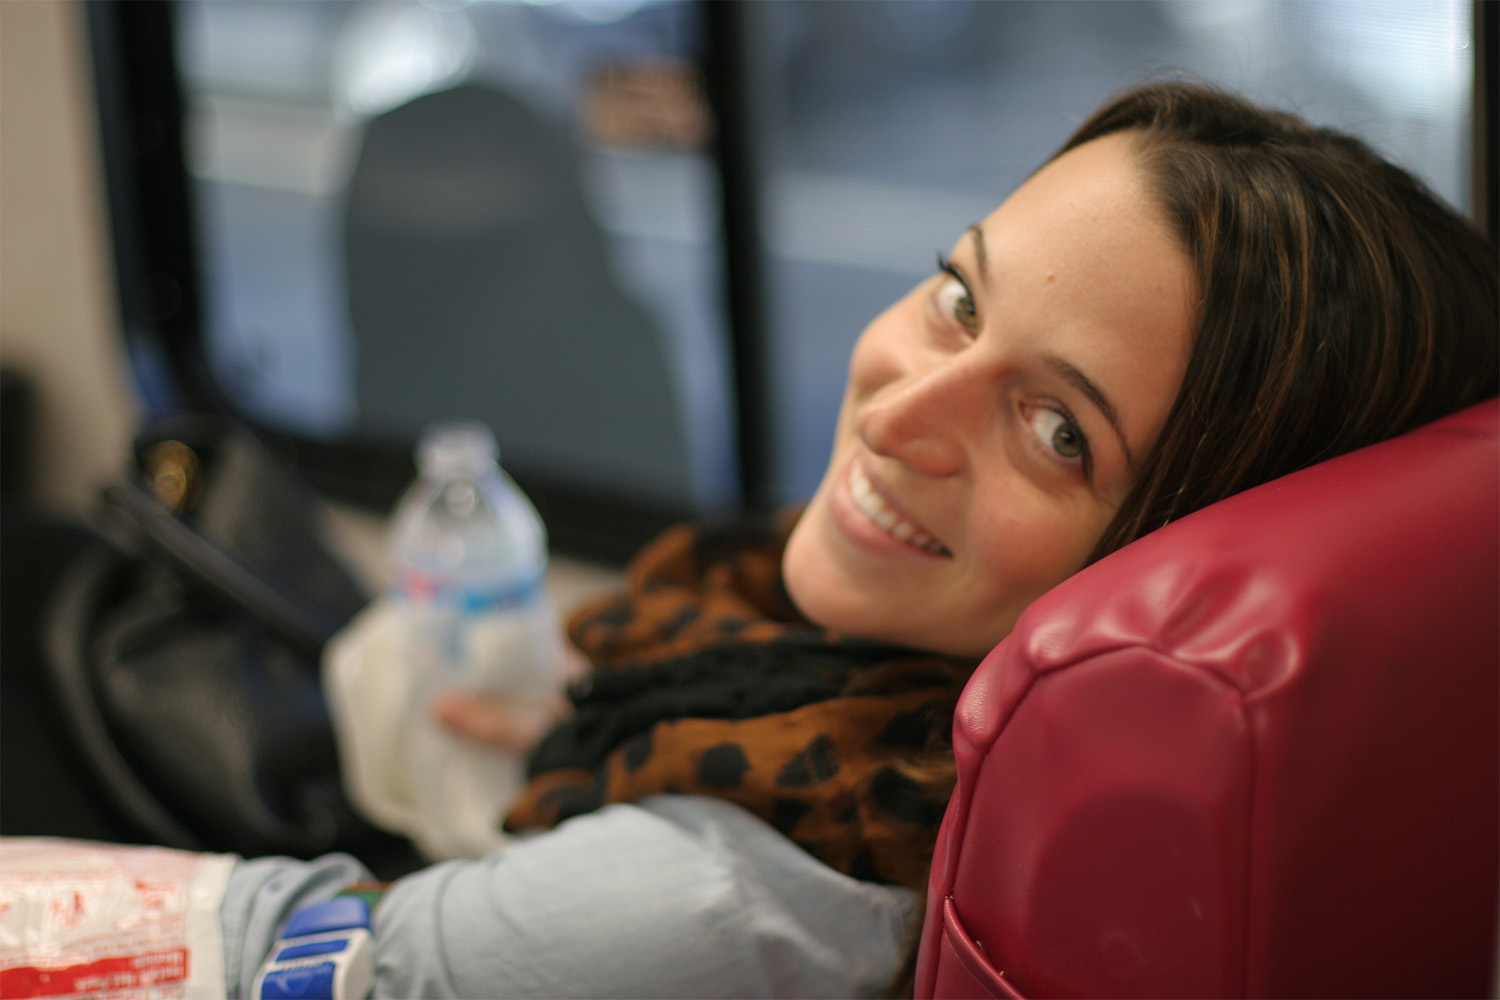 Tia takes a break from hydrating while giving blood to smile for the camera.